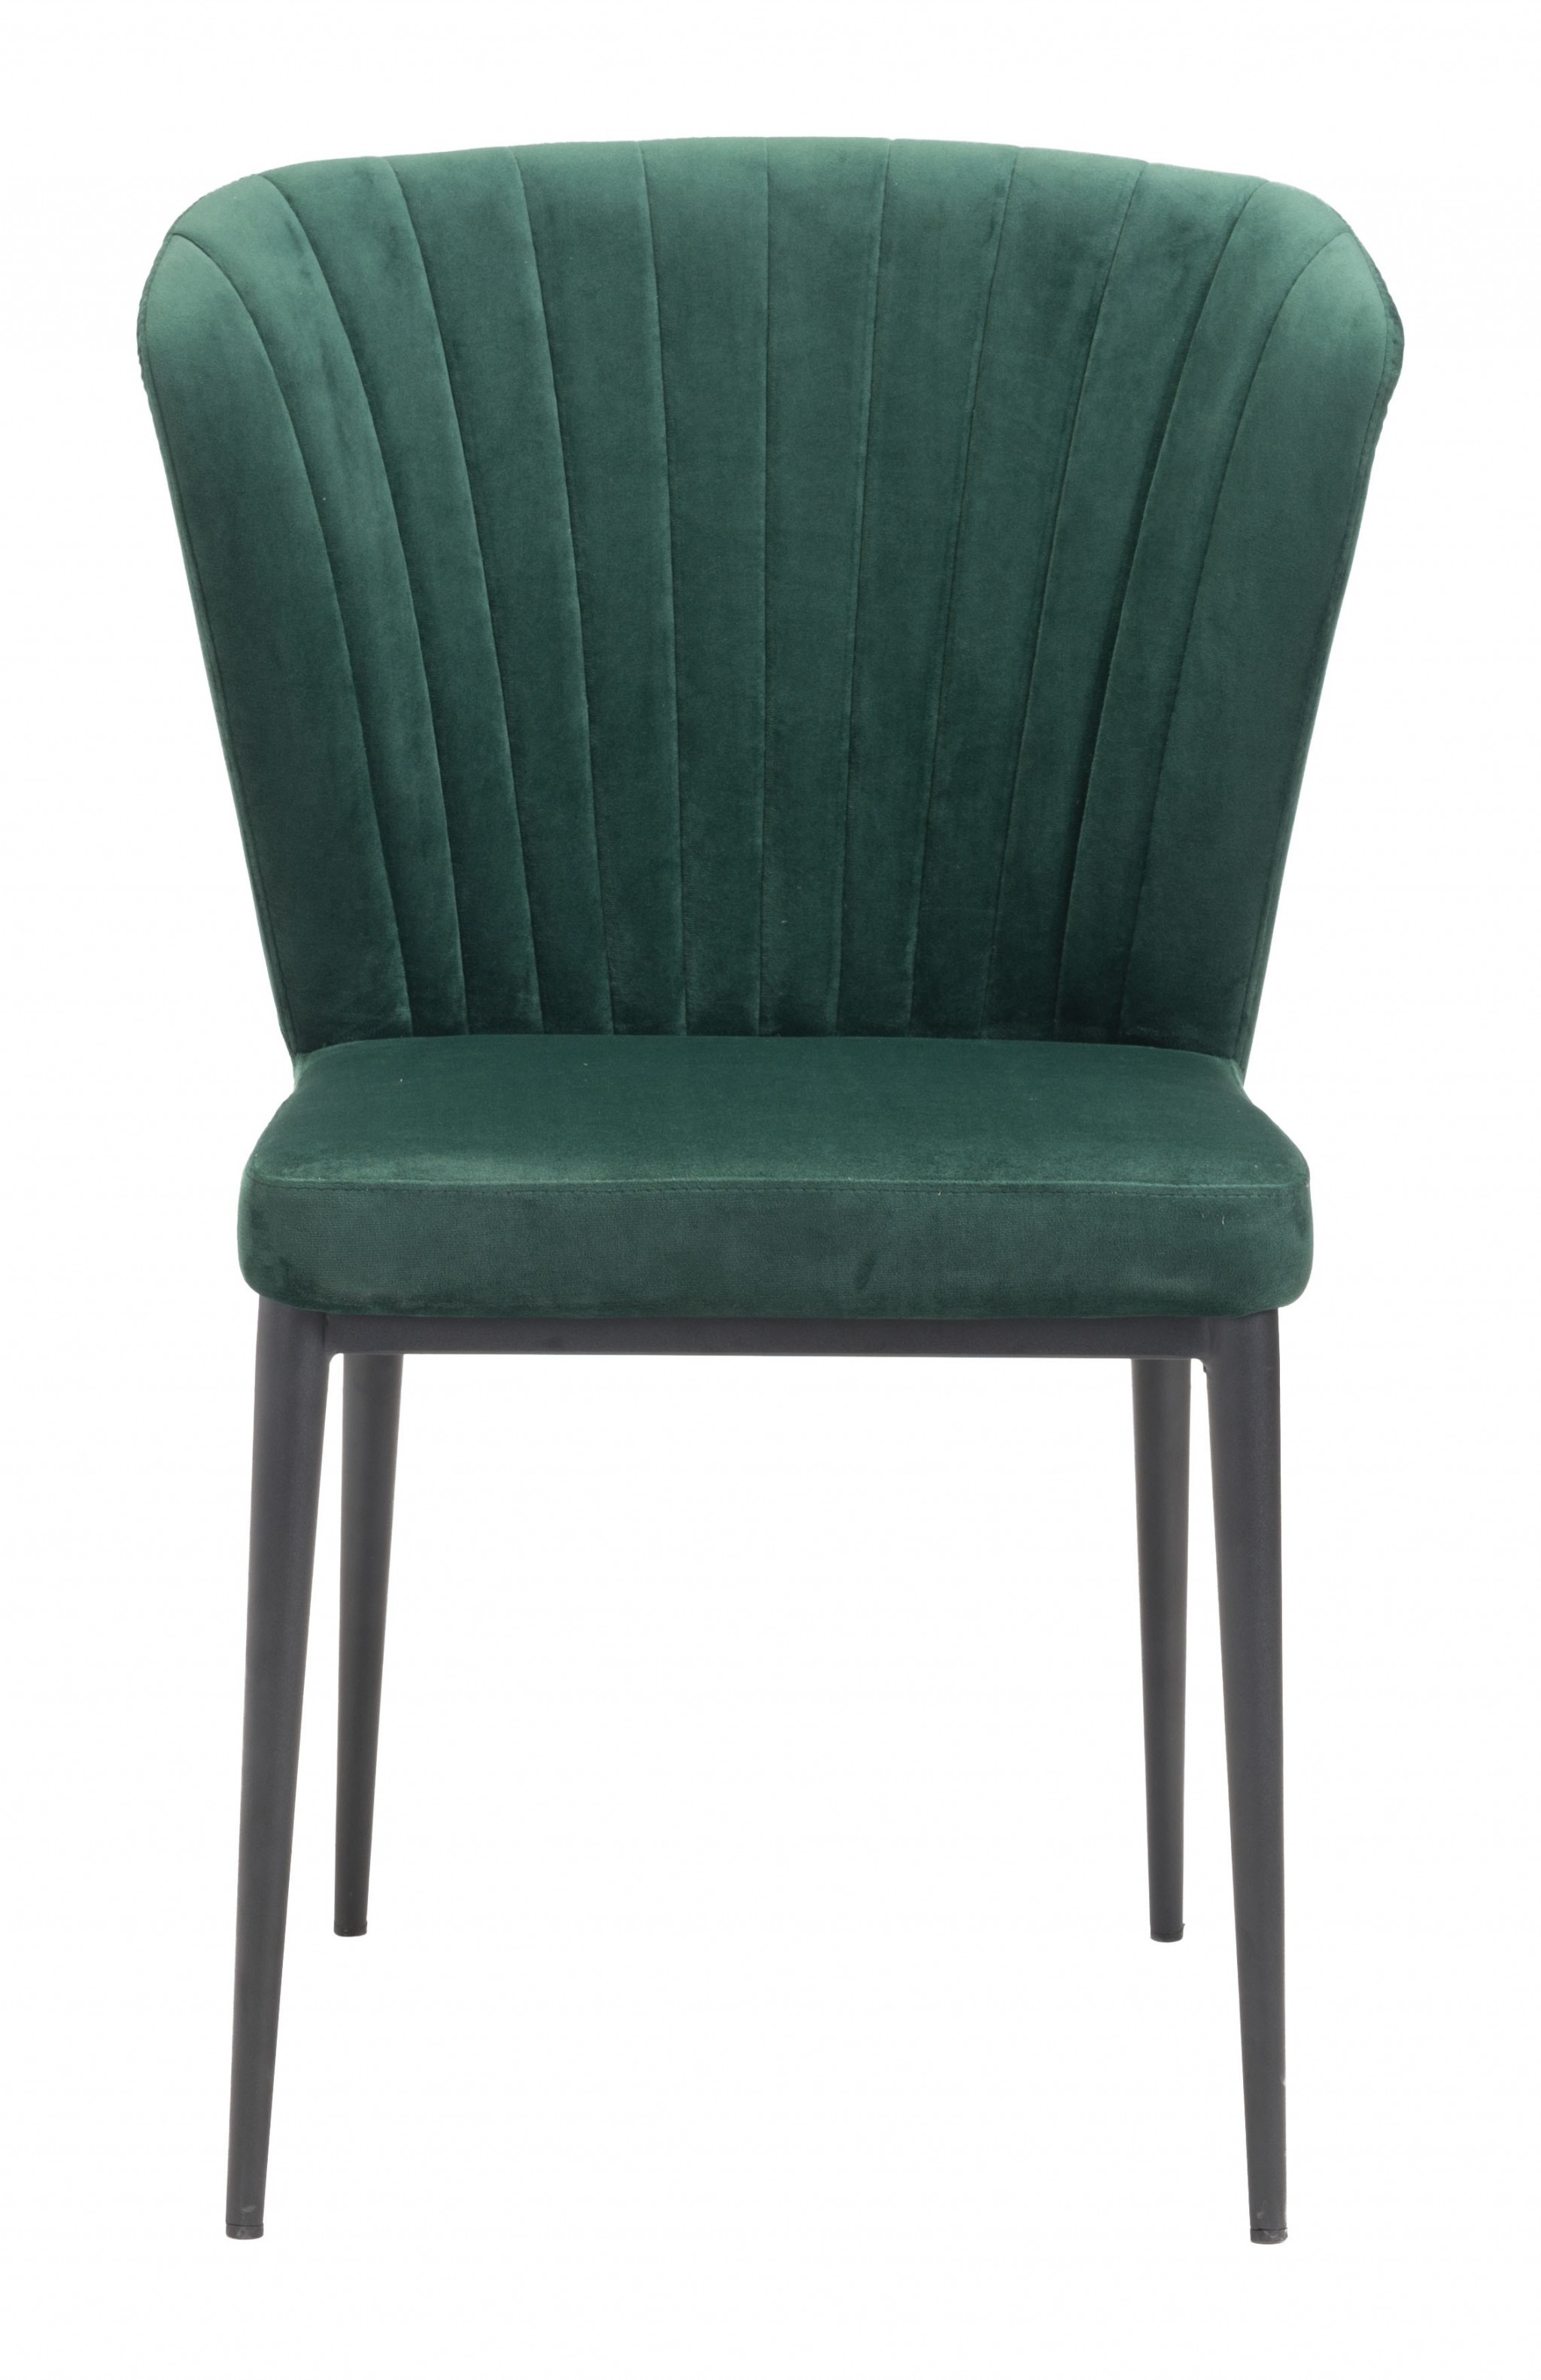 Tolivere Dining Chair (Set of 2) Green